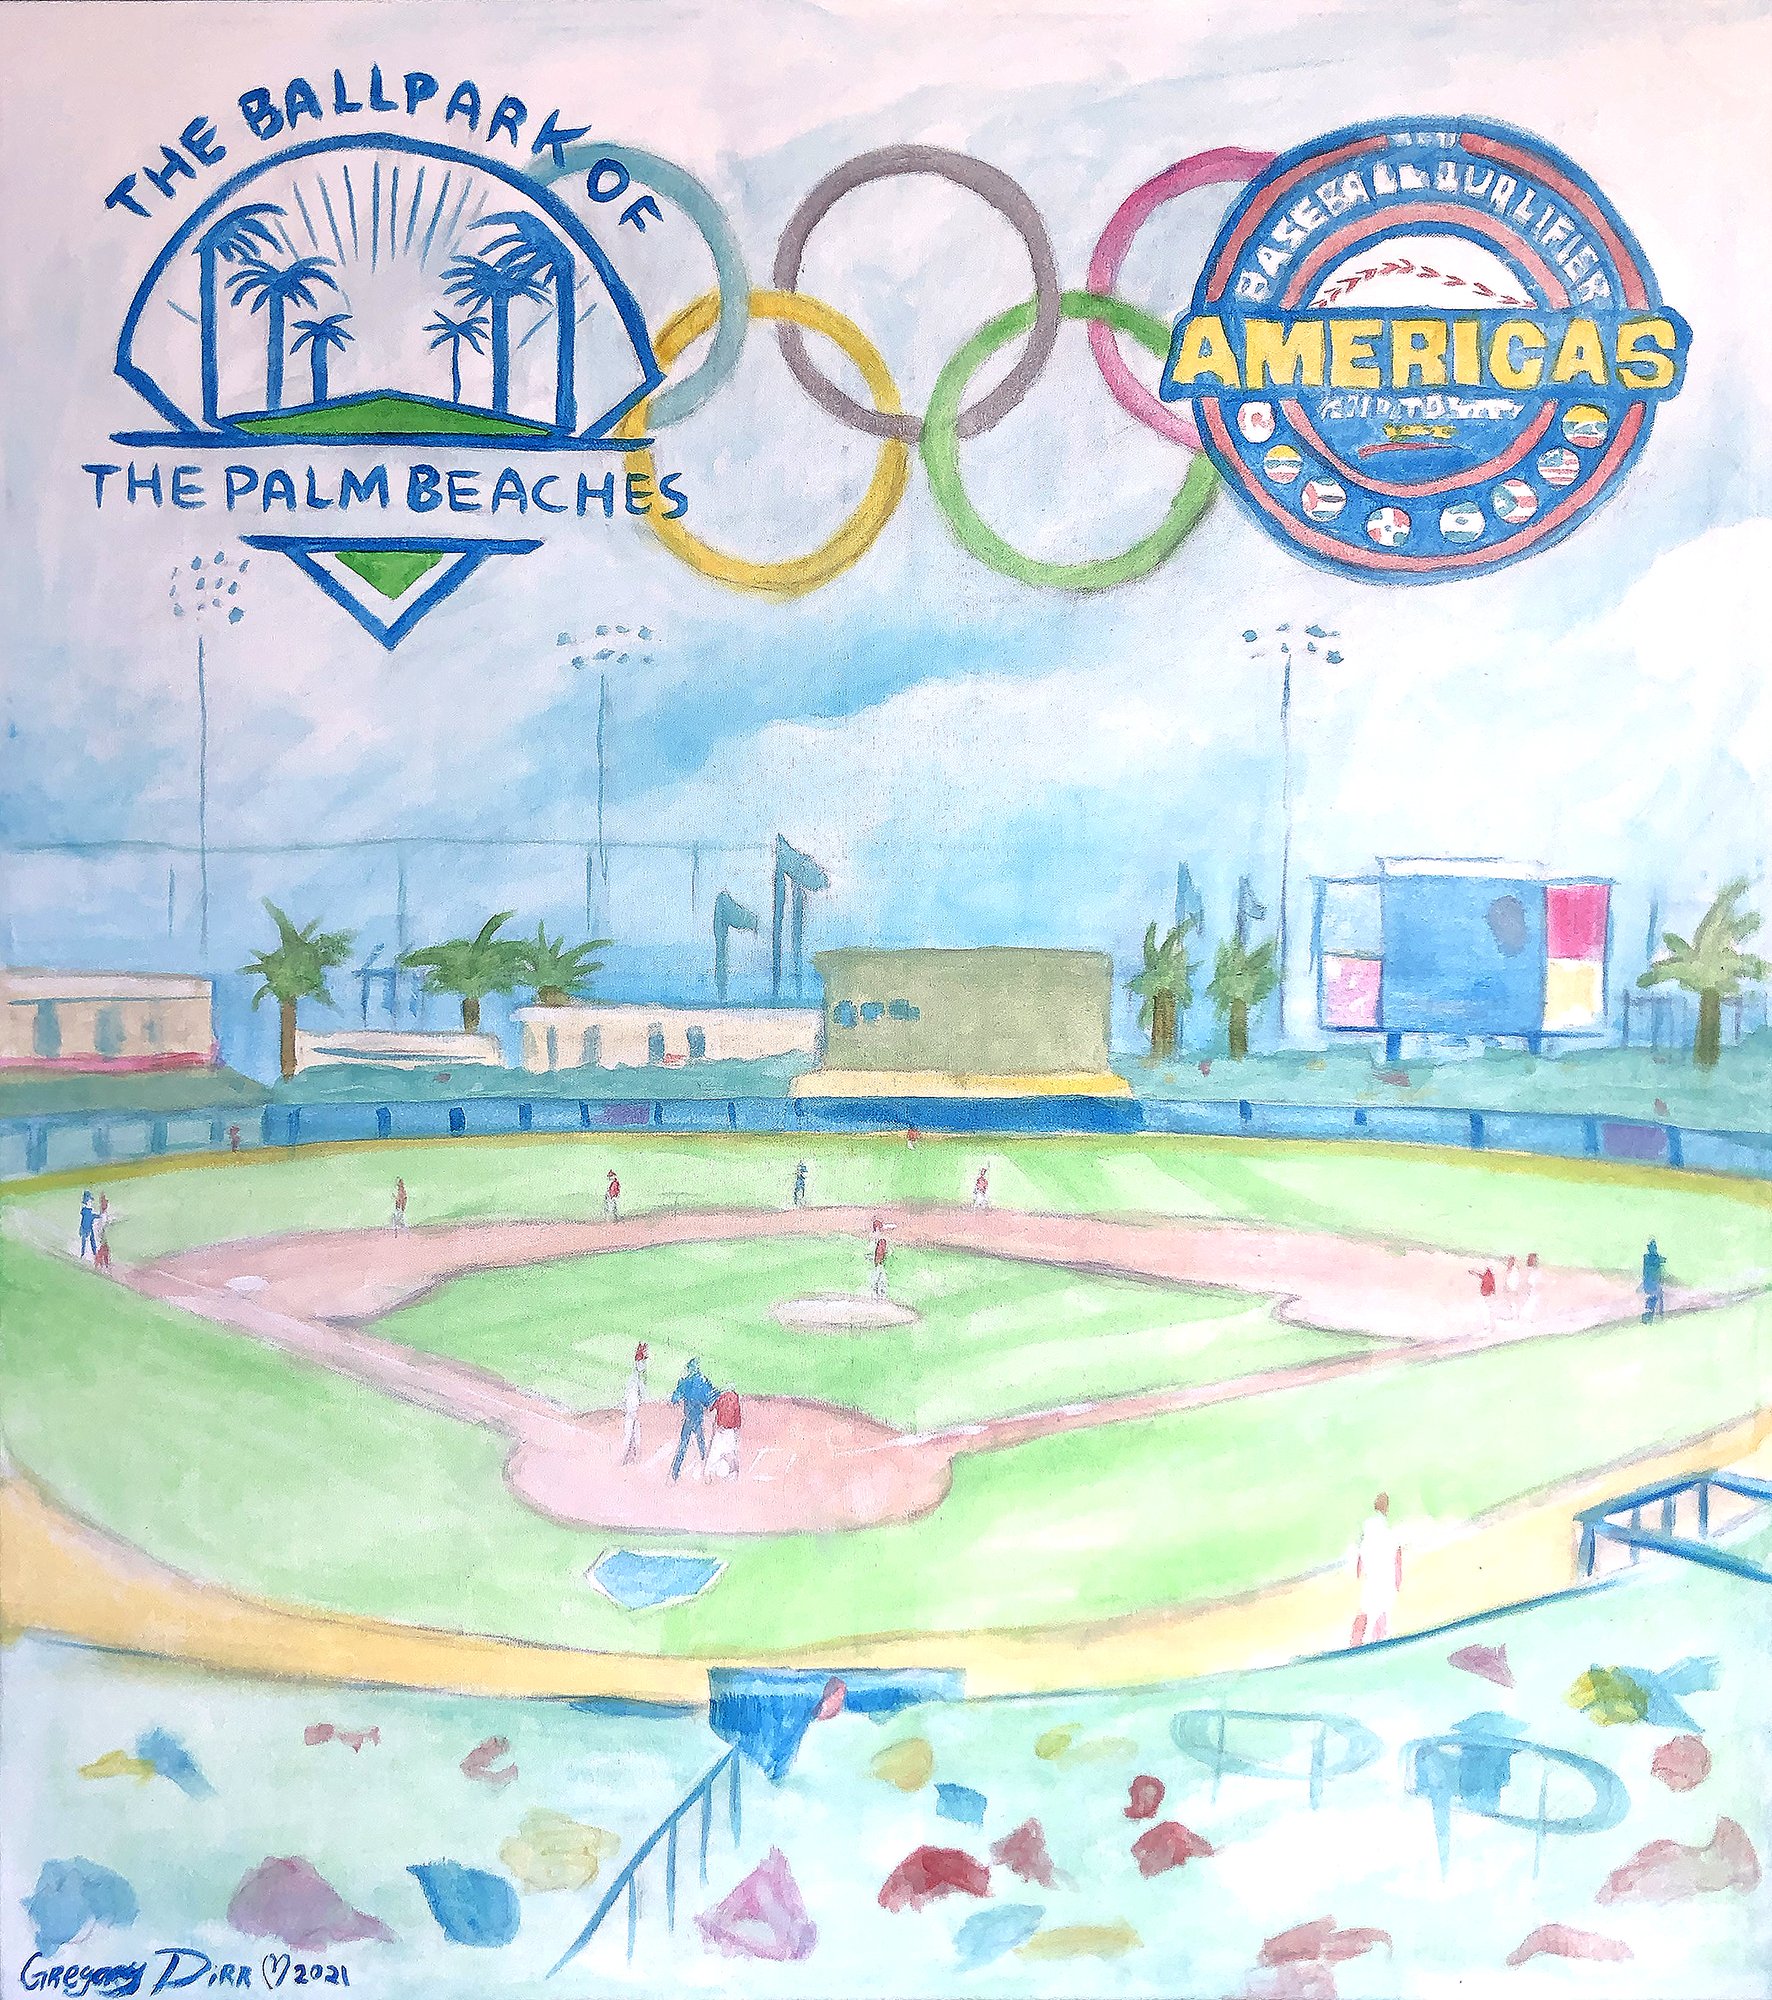   The Ballpark Of The Palm Beaches  acrylic on canvas. 2021   commissioned by The Ballpark Of The Palm Beach for Olympic Qualifier 2021  